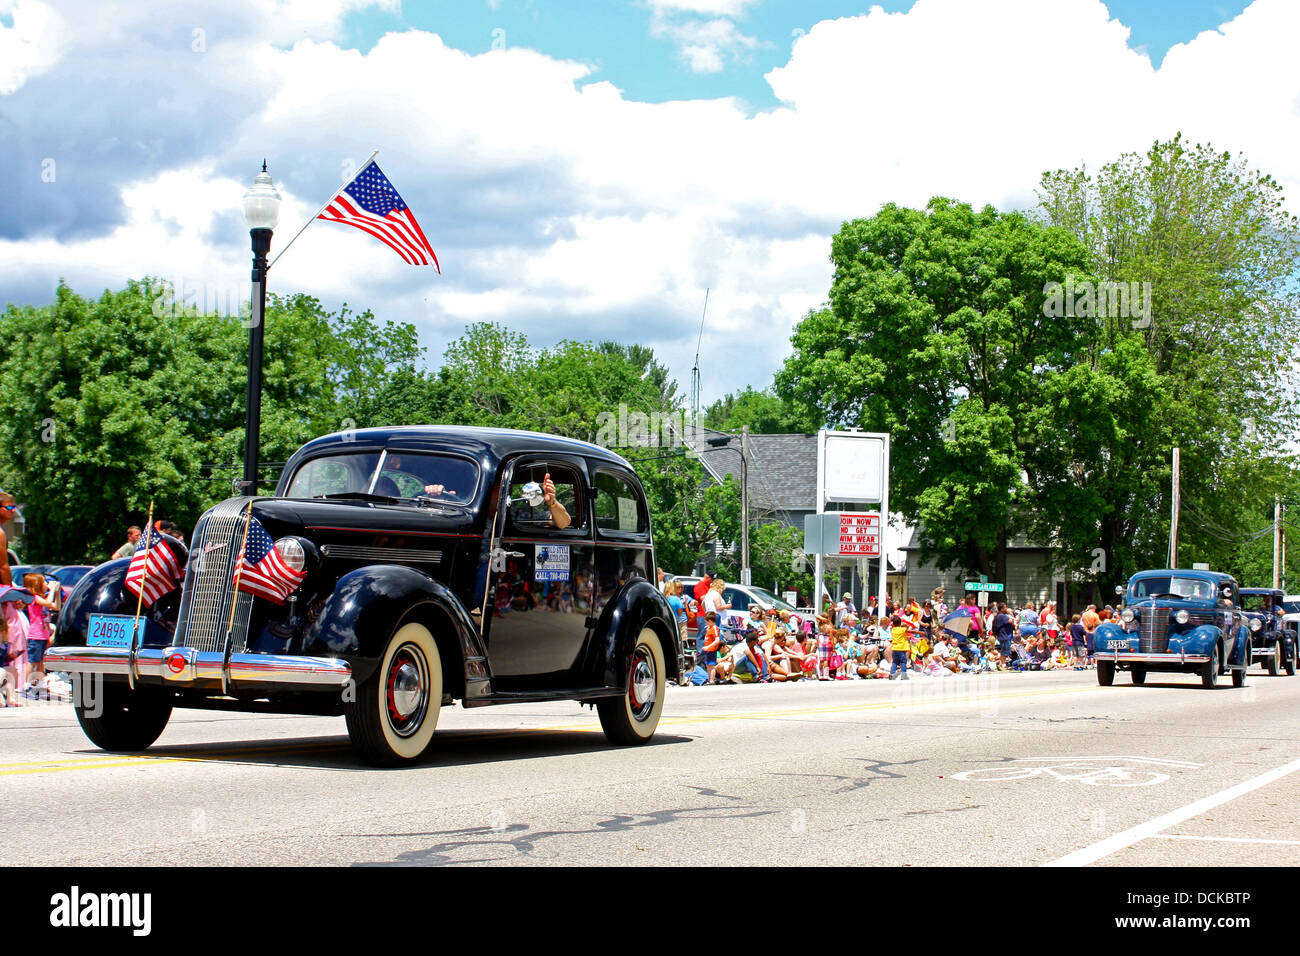 A classic old Pontiac Car from the Old Style Auto Club drives in a parade in West Salem, Wisconsin USA on June 1st, 2013. Stock Photo